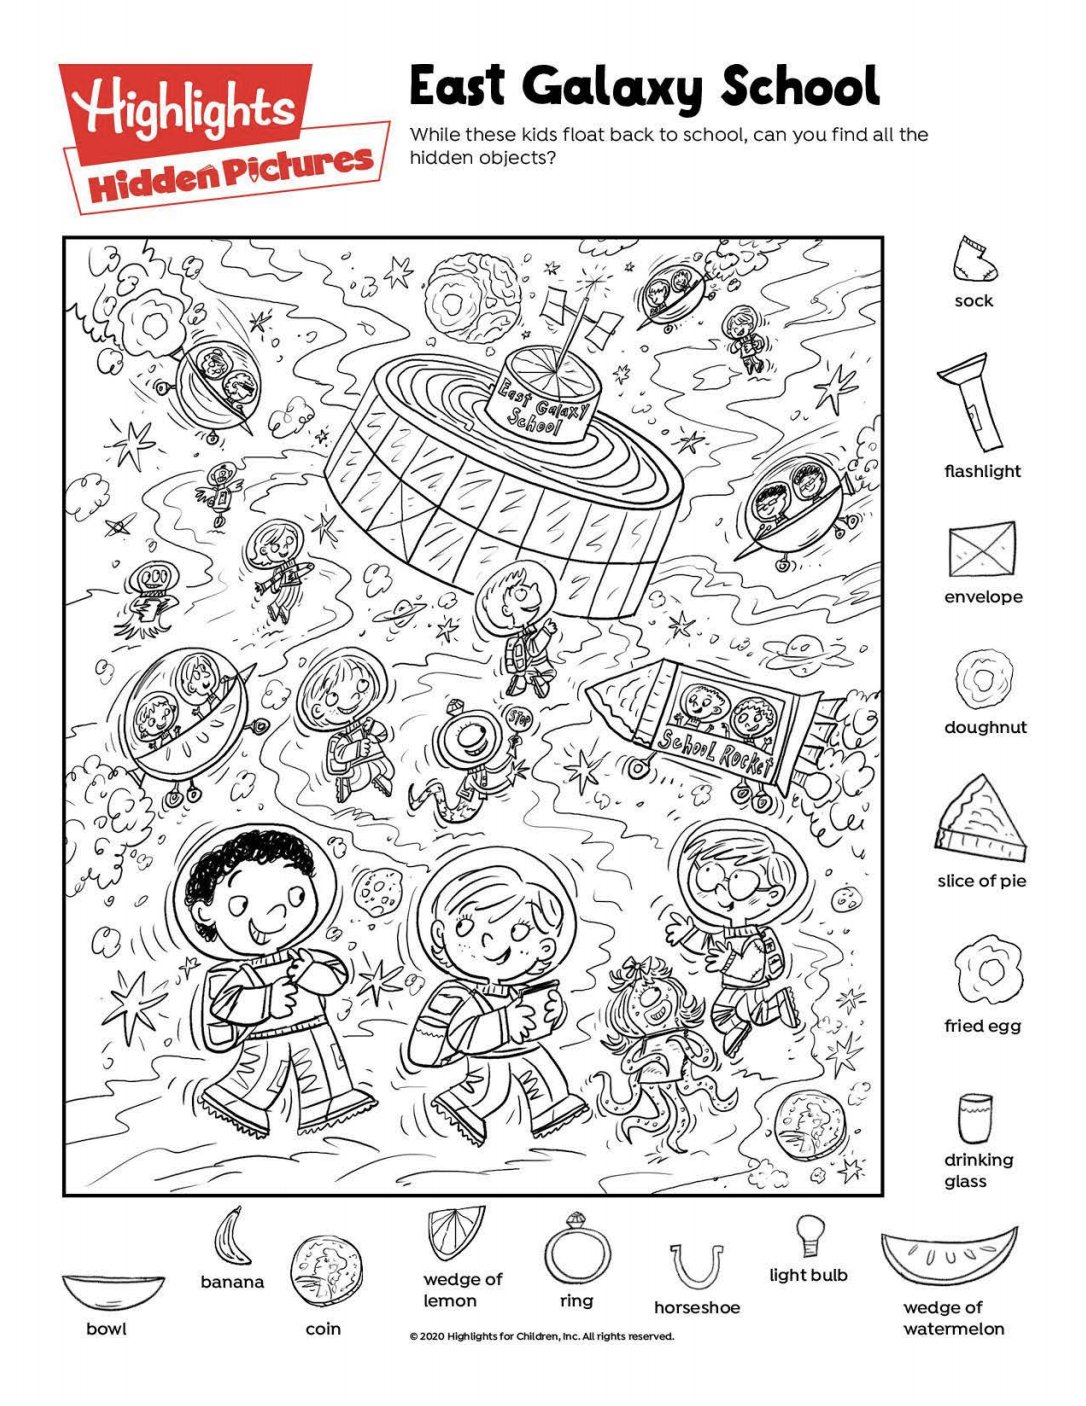 modnes vask flamme Highlights on Twitter: "Have you solved this far out #HiddenPictures puzzle  from our latest Highlights@Home pack yet? 🚀 Download the free printable  for your kids at https://t.co/ASgwhOlEco (There's no shame in printing